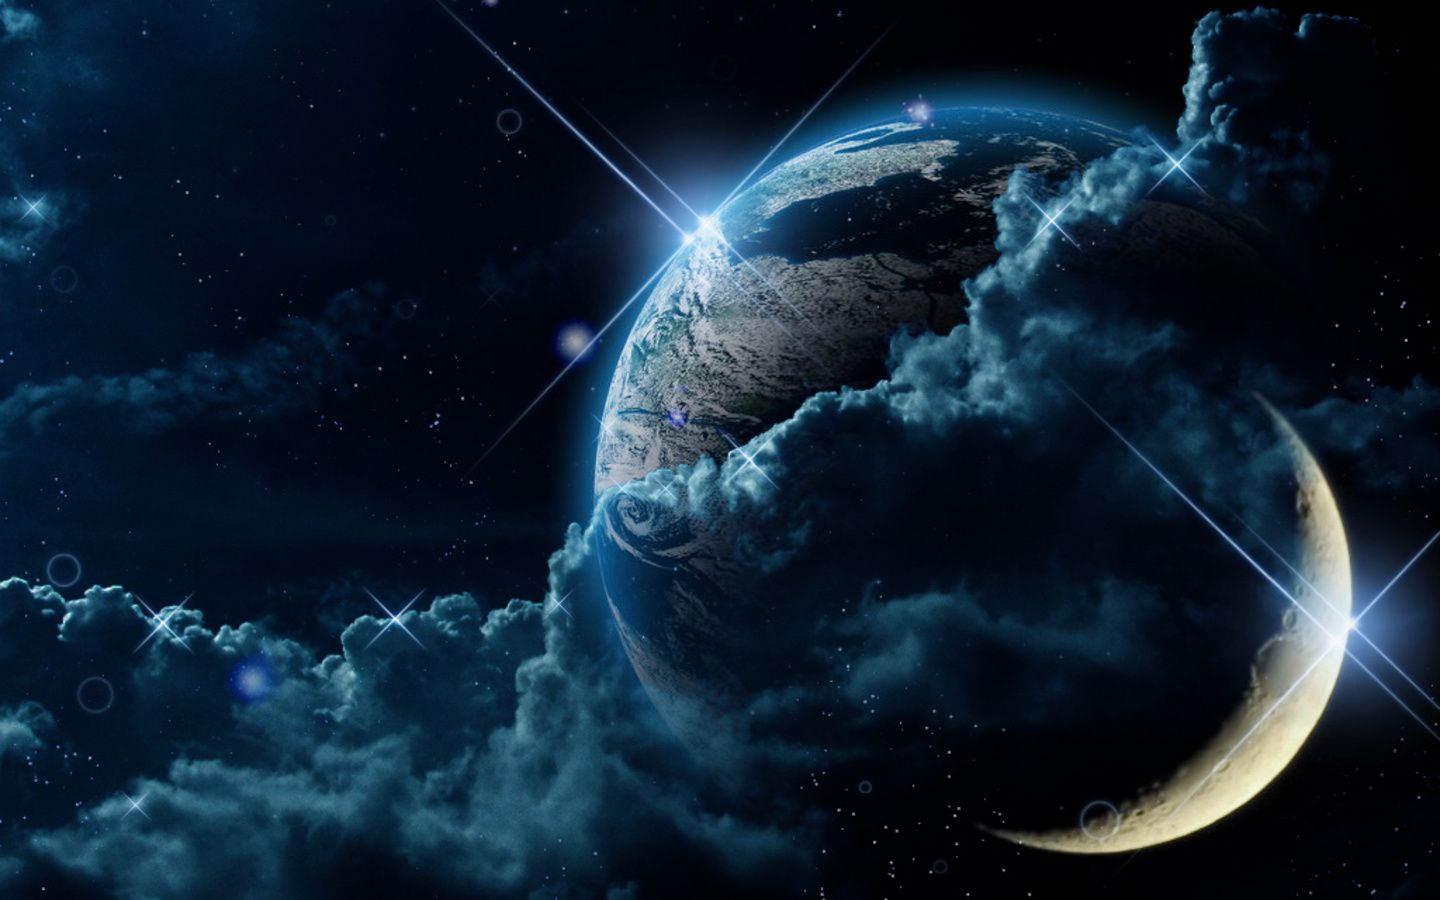 Download Fantasy Mysterious Space Free Wallpaper 1440x900 | Full ...